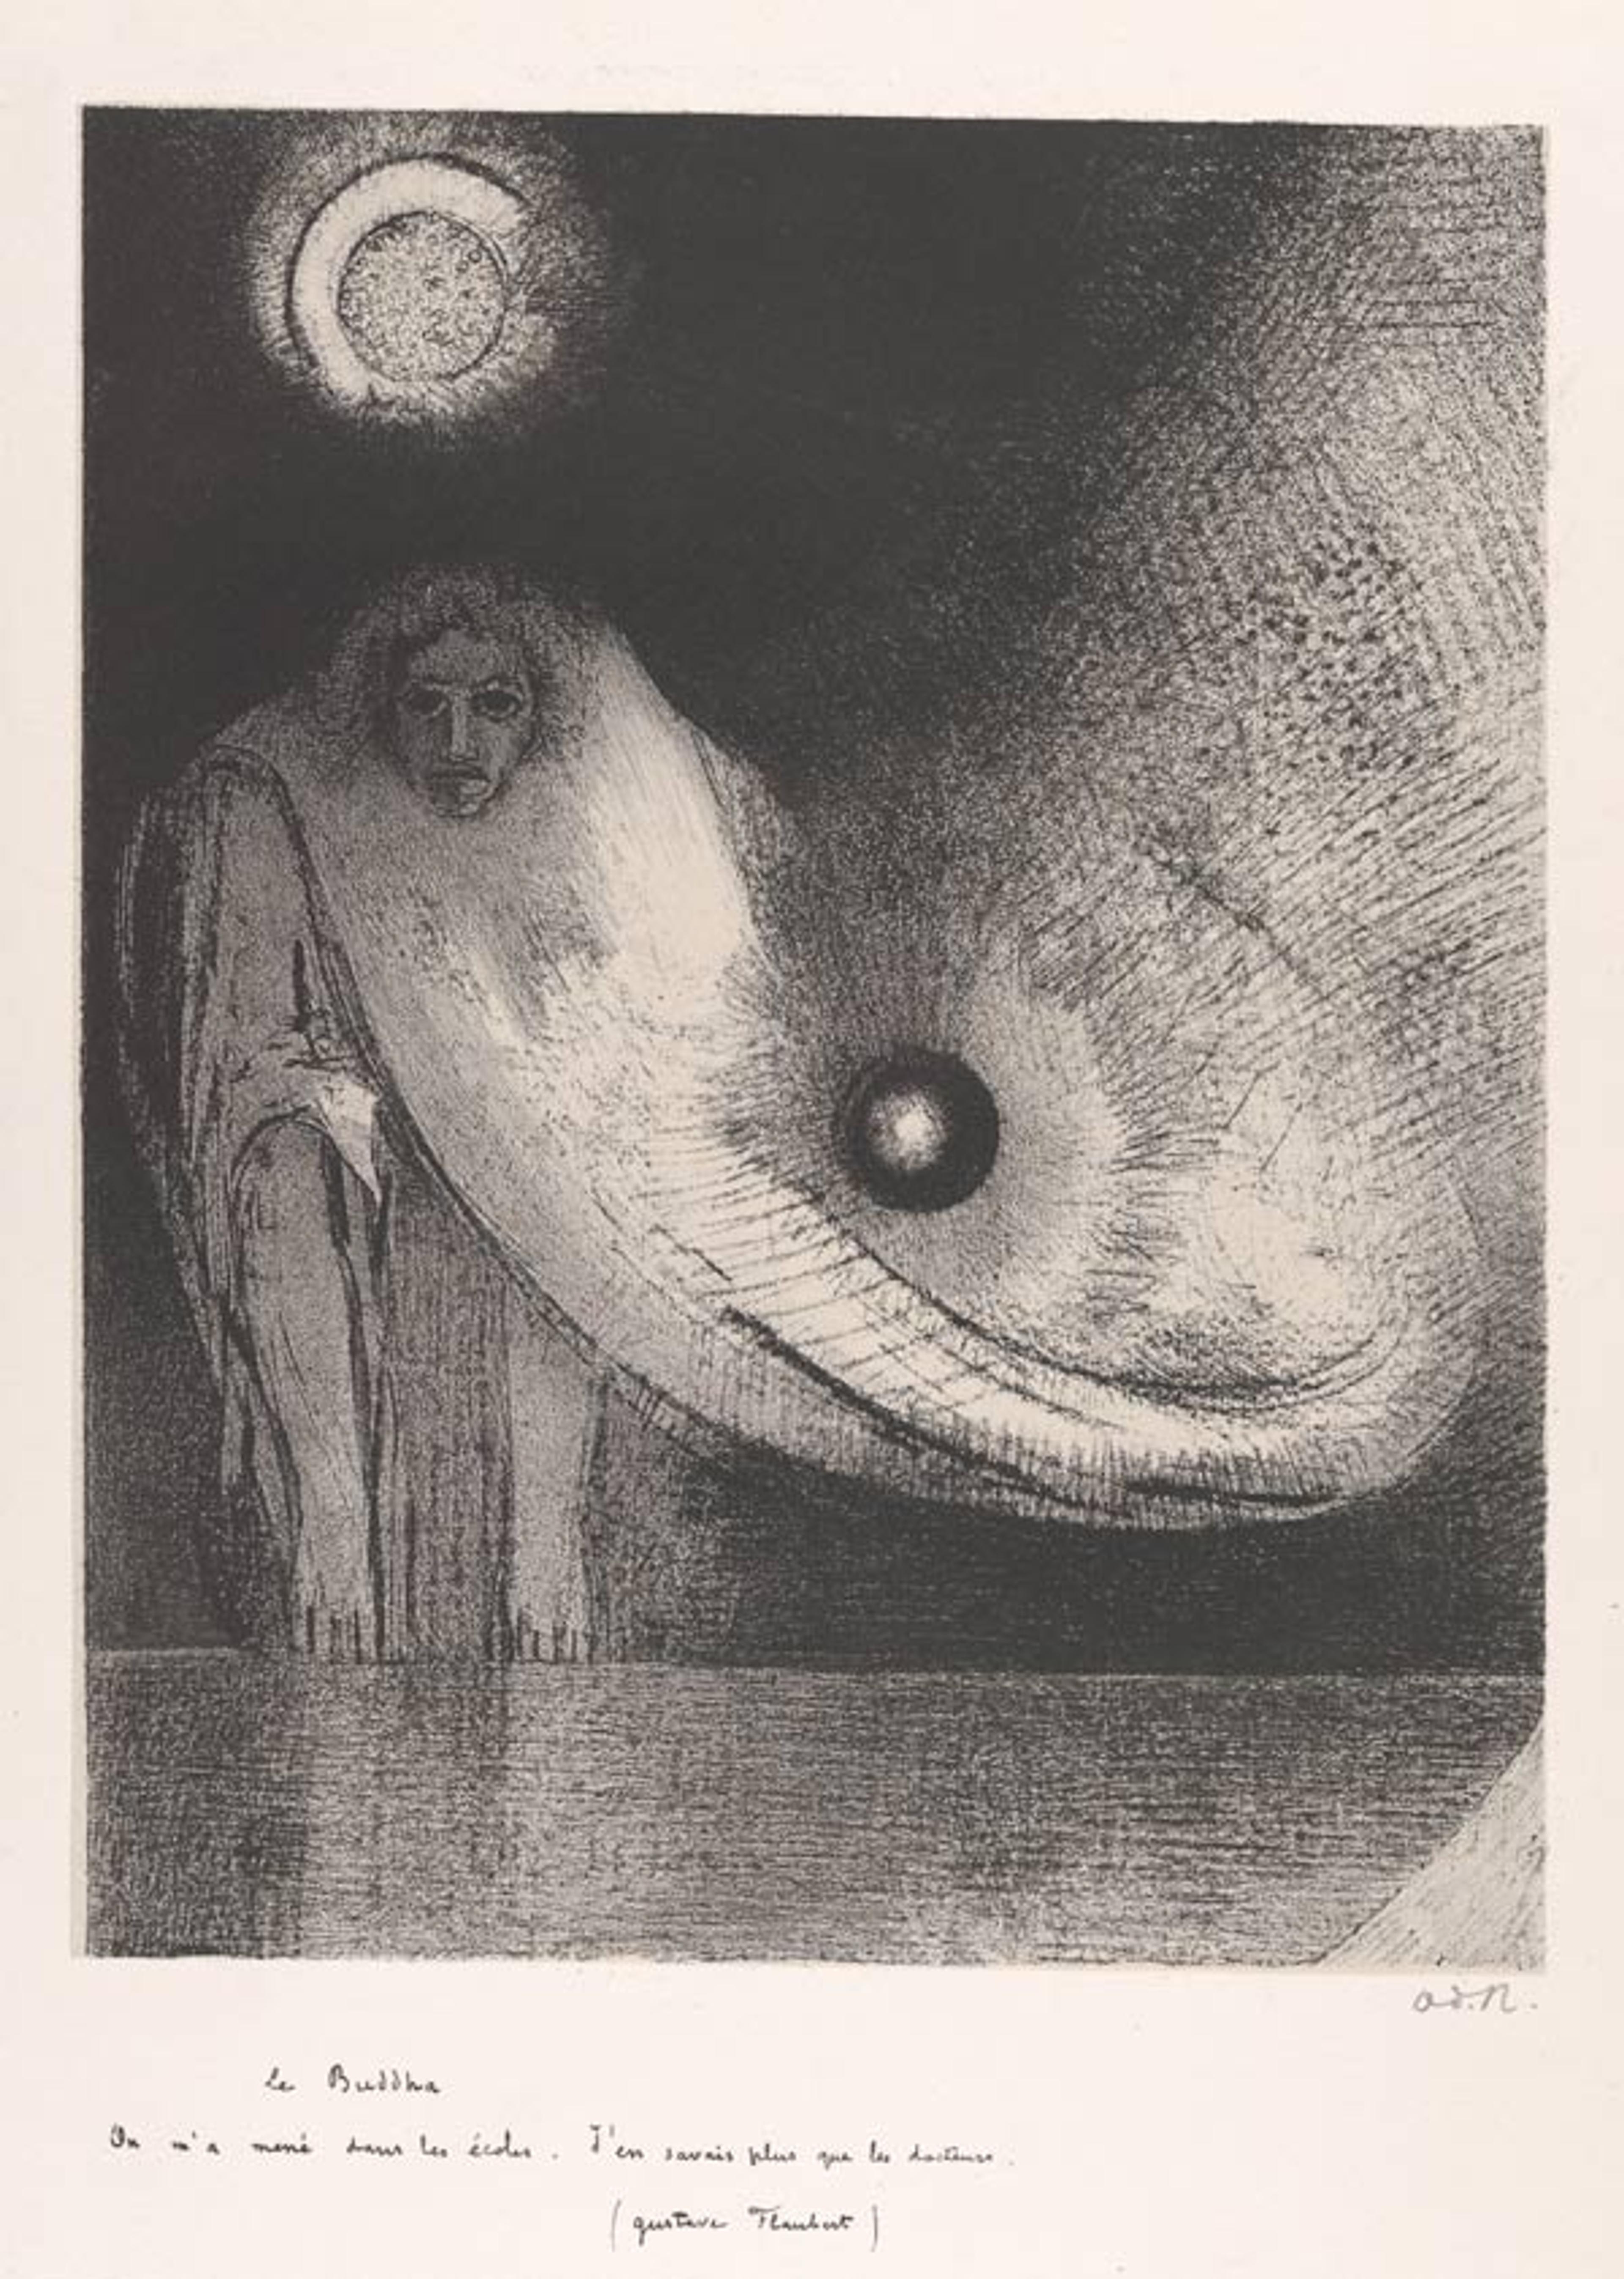 The Buddha (from L'Estampe originale, Album IX)U, 1895. Odilon Redon (French, Bordeaux 1840–1916 Paris). Printer Auguste Clot (French). Publisher André Marty (French, born 1857). Lithograph on chine collé; Image: 12 5/16 x 9 3/4 in. (31.3 x 24.8 cm). Sheet: 21 9/16 x 15 3/16 in. (54.7 x 38.5 cm). The Metropolitan Museum of Art, New York, Rogers Fund, 1922 (22.82.1-90)